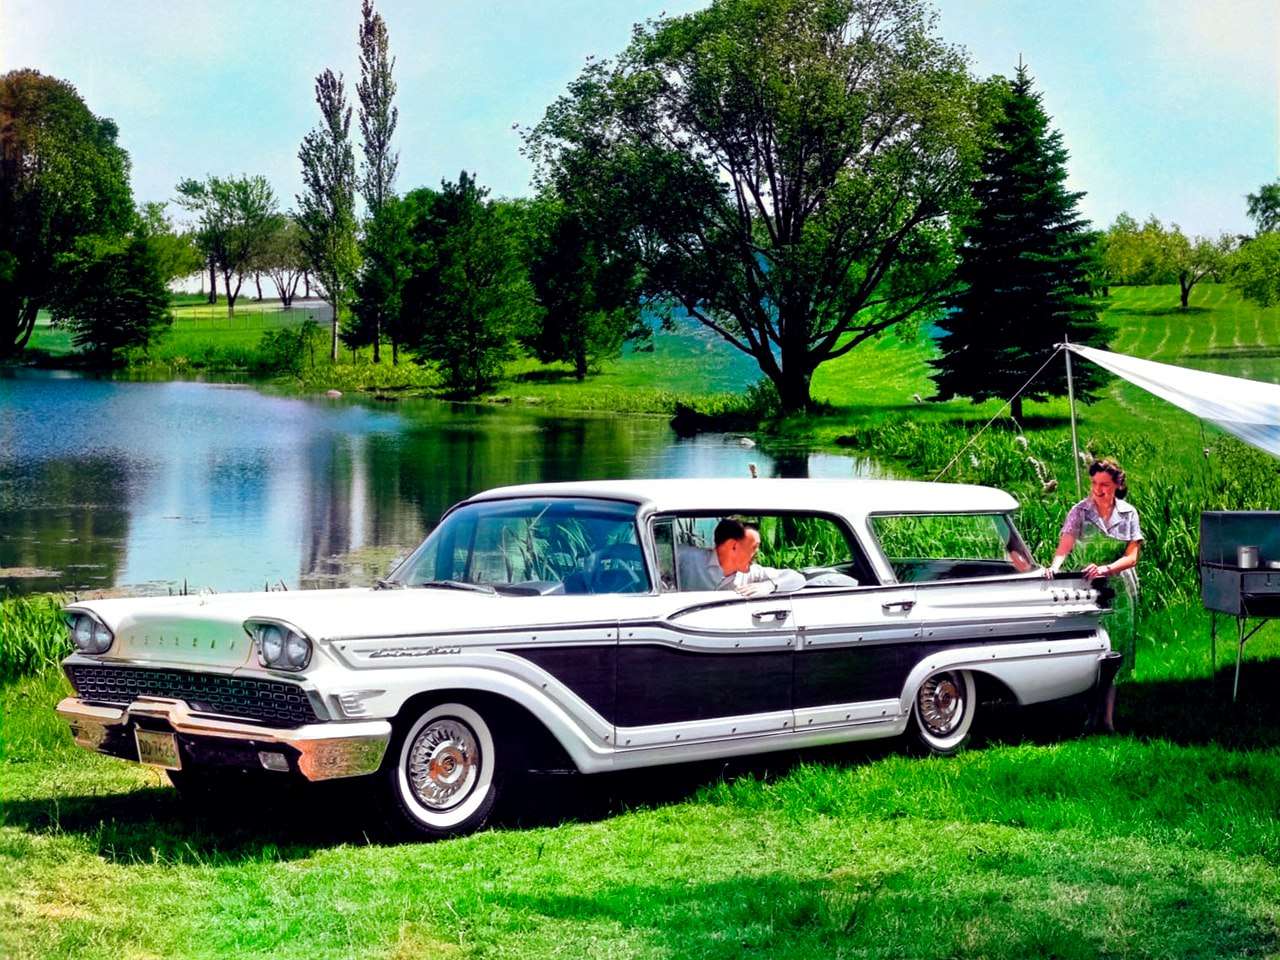 1959 Mercury Country Cruiser Colony Park Pussel online